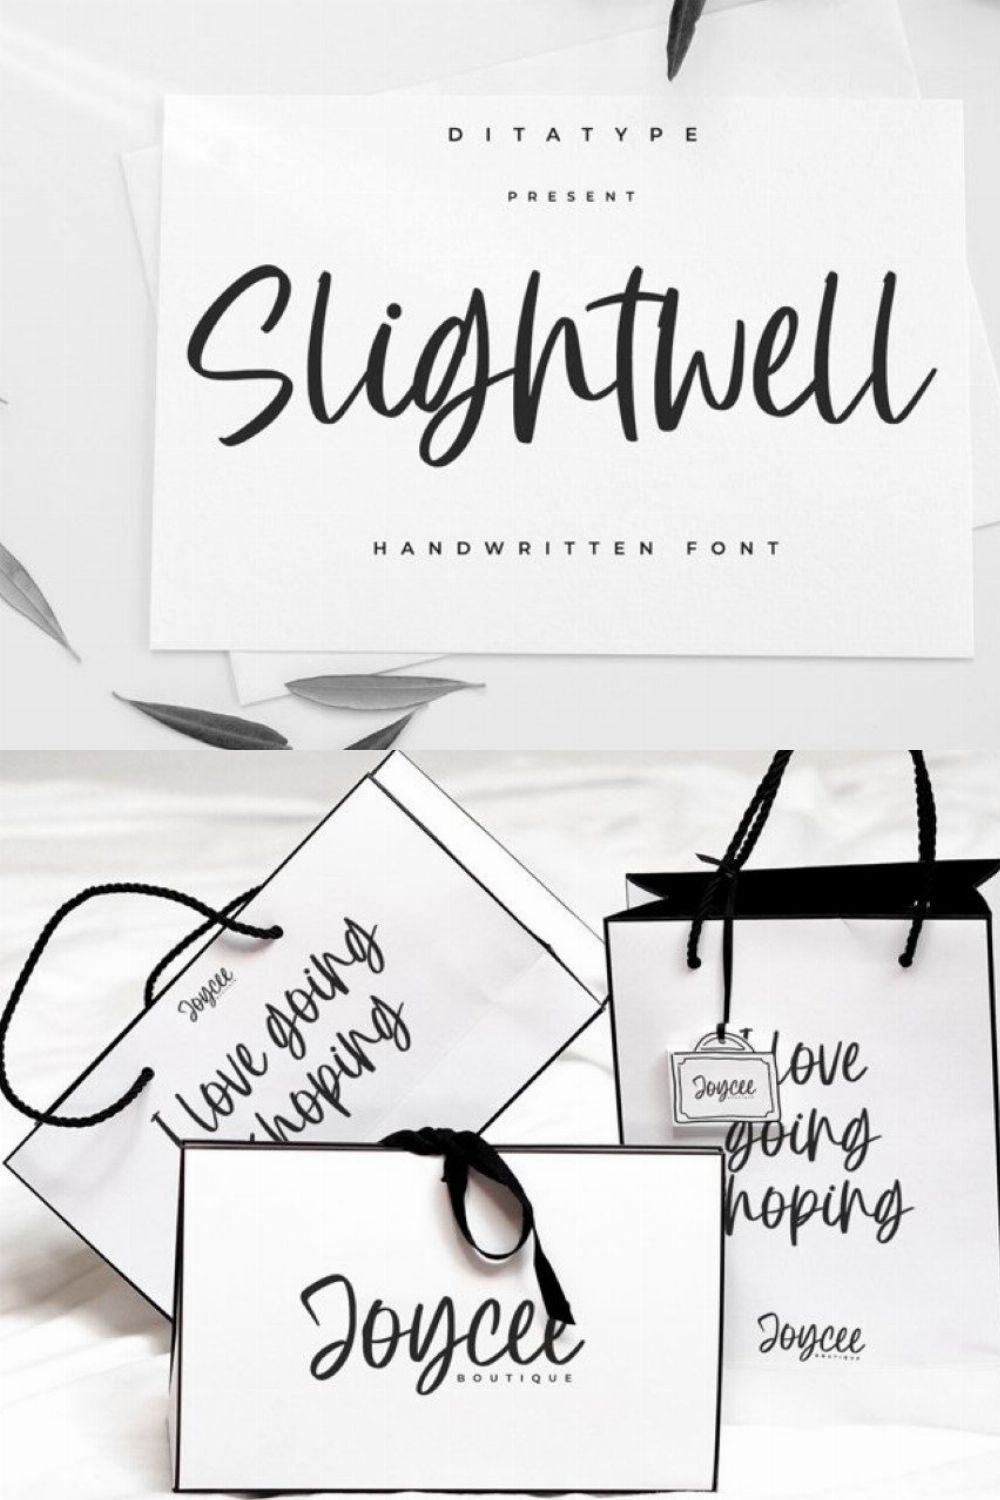 Slightwell pinterest preview image.